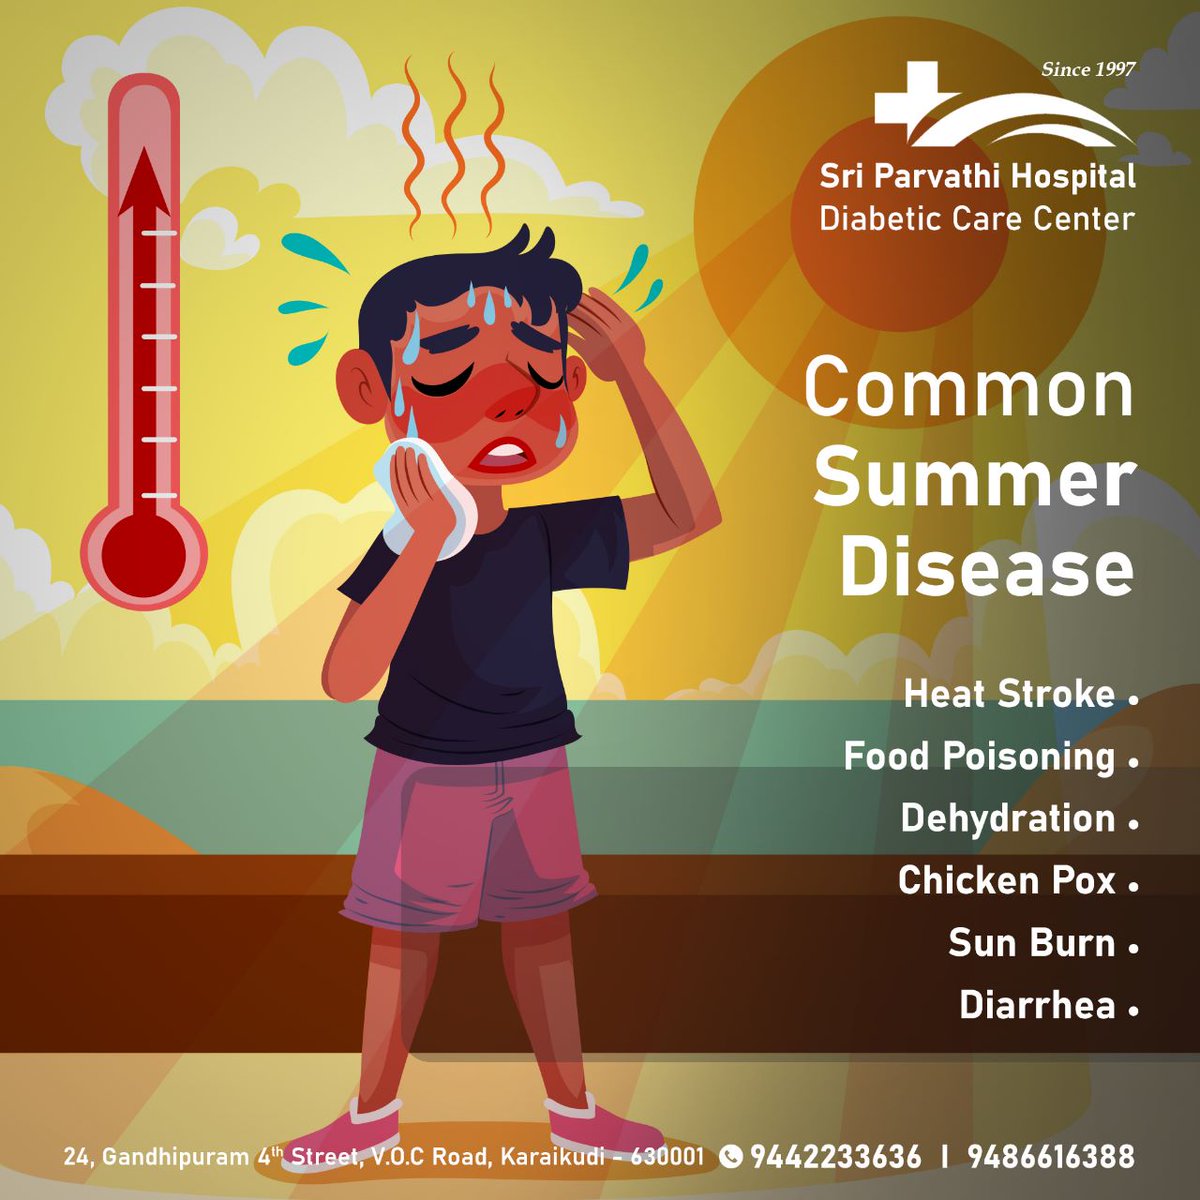 'Stay hydrated and healthy this summer and beat the heat! Our hospital is here to help you prevent and treat summer diseases. Let us take care of you and your loved ones.'

For appointment Call Sri Parvathi Hospital - 94422 33636

Visit: sriparvathihospitals.com

#BeatTheHeat2023